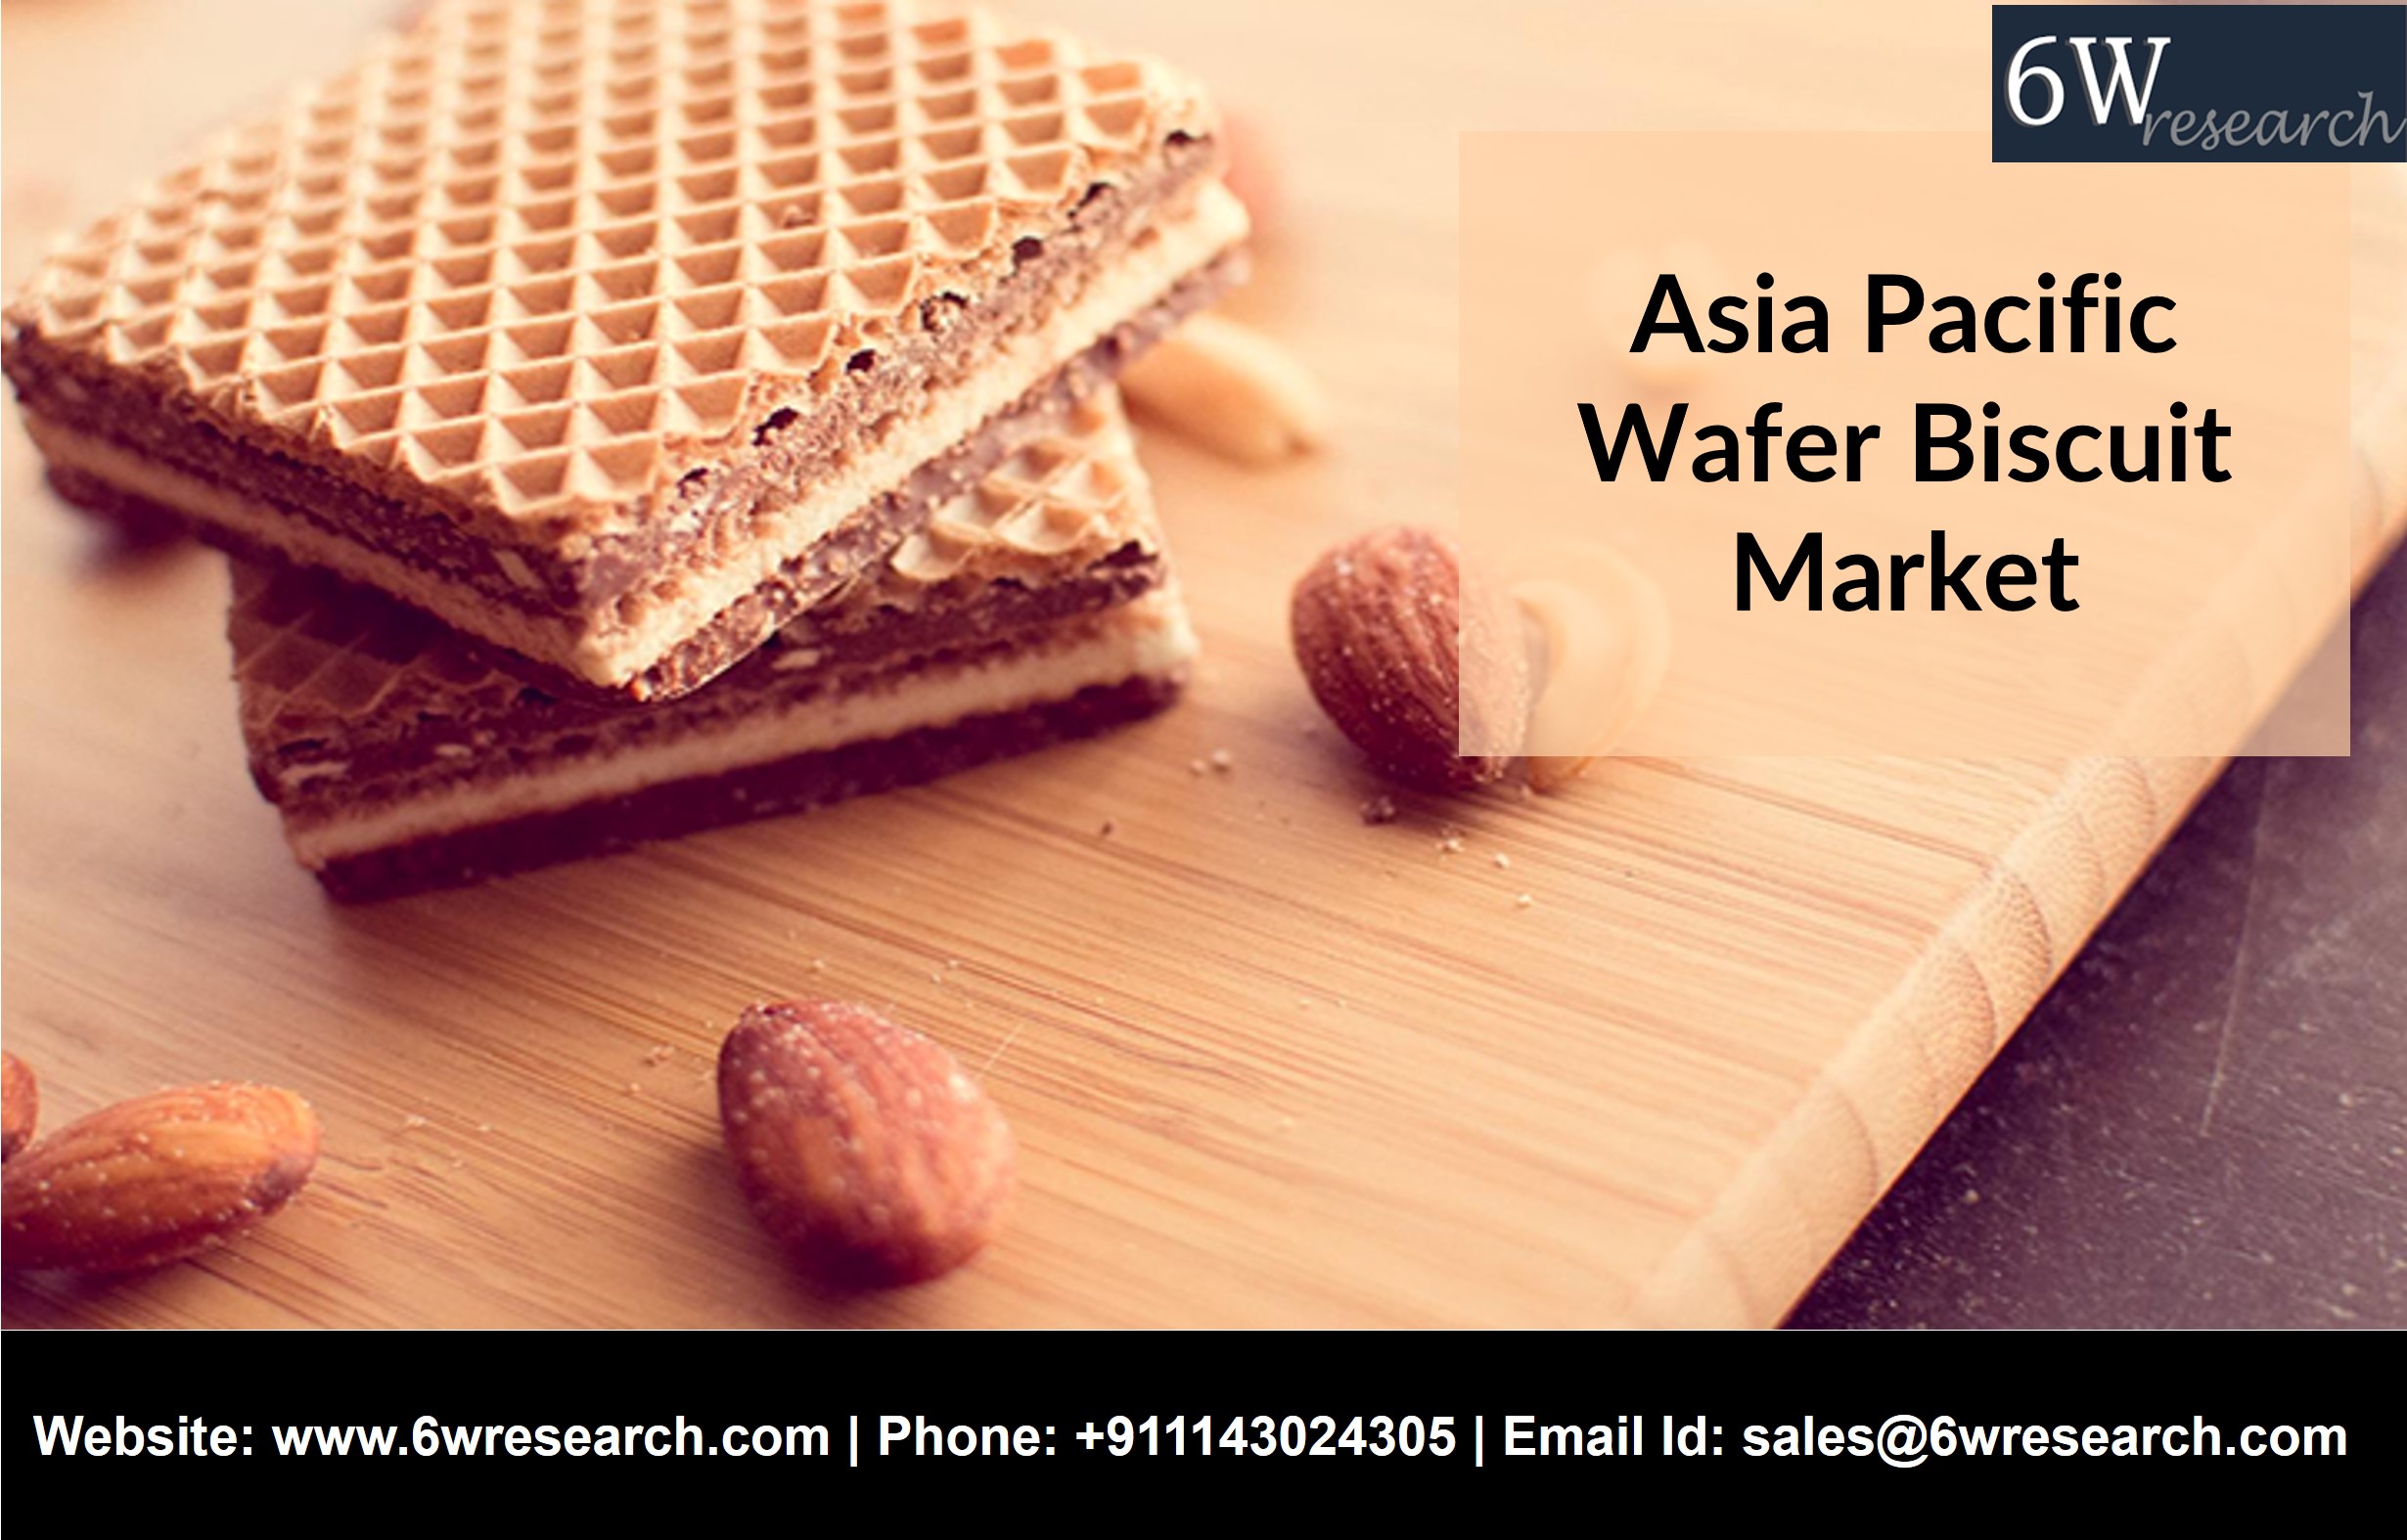 Asia Pacific Wafer Biscuit Market